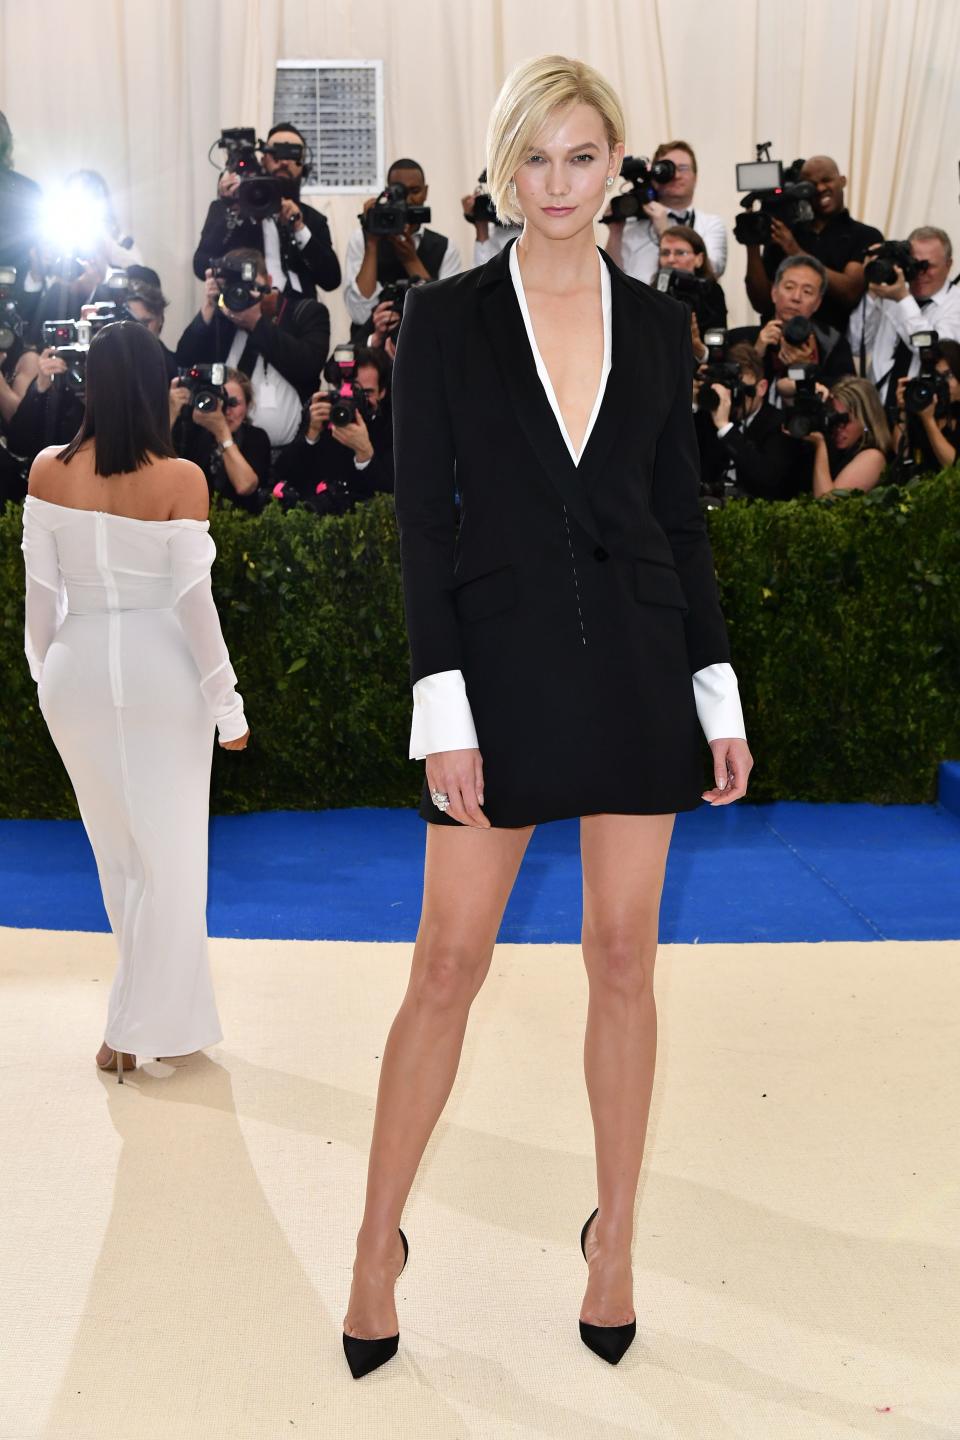 <h1 class="title">Karlie Kloss in Carolina Herrera and Christian Louboutin shoes</h1><cite class="credit">Photo: Shutterstock</cite>